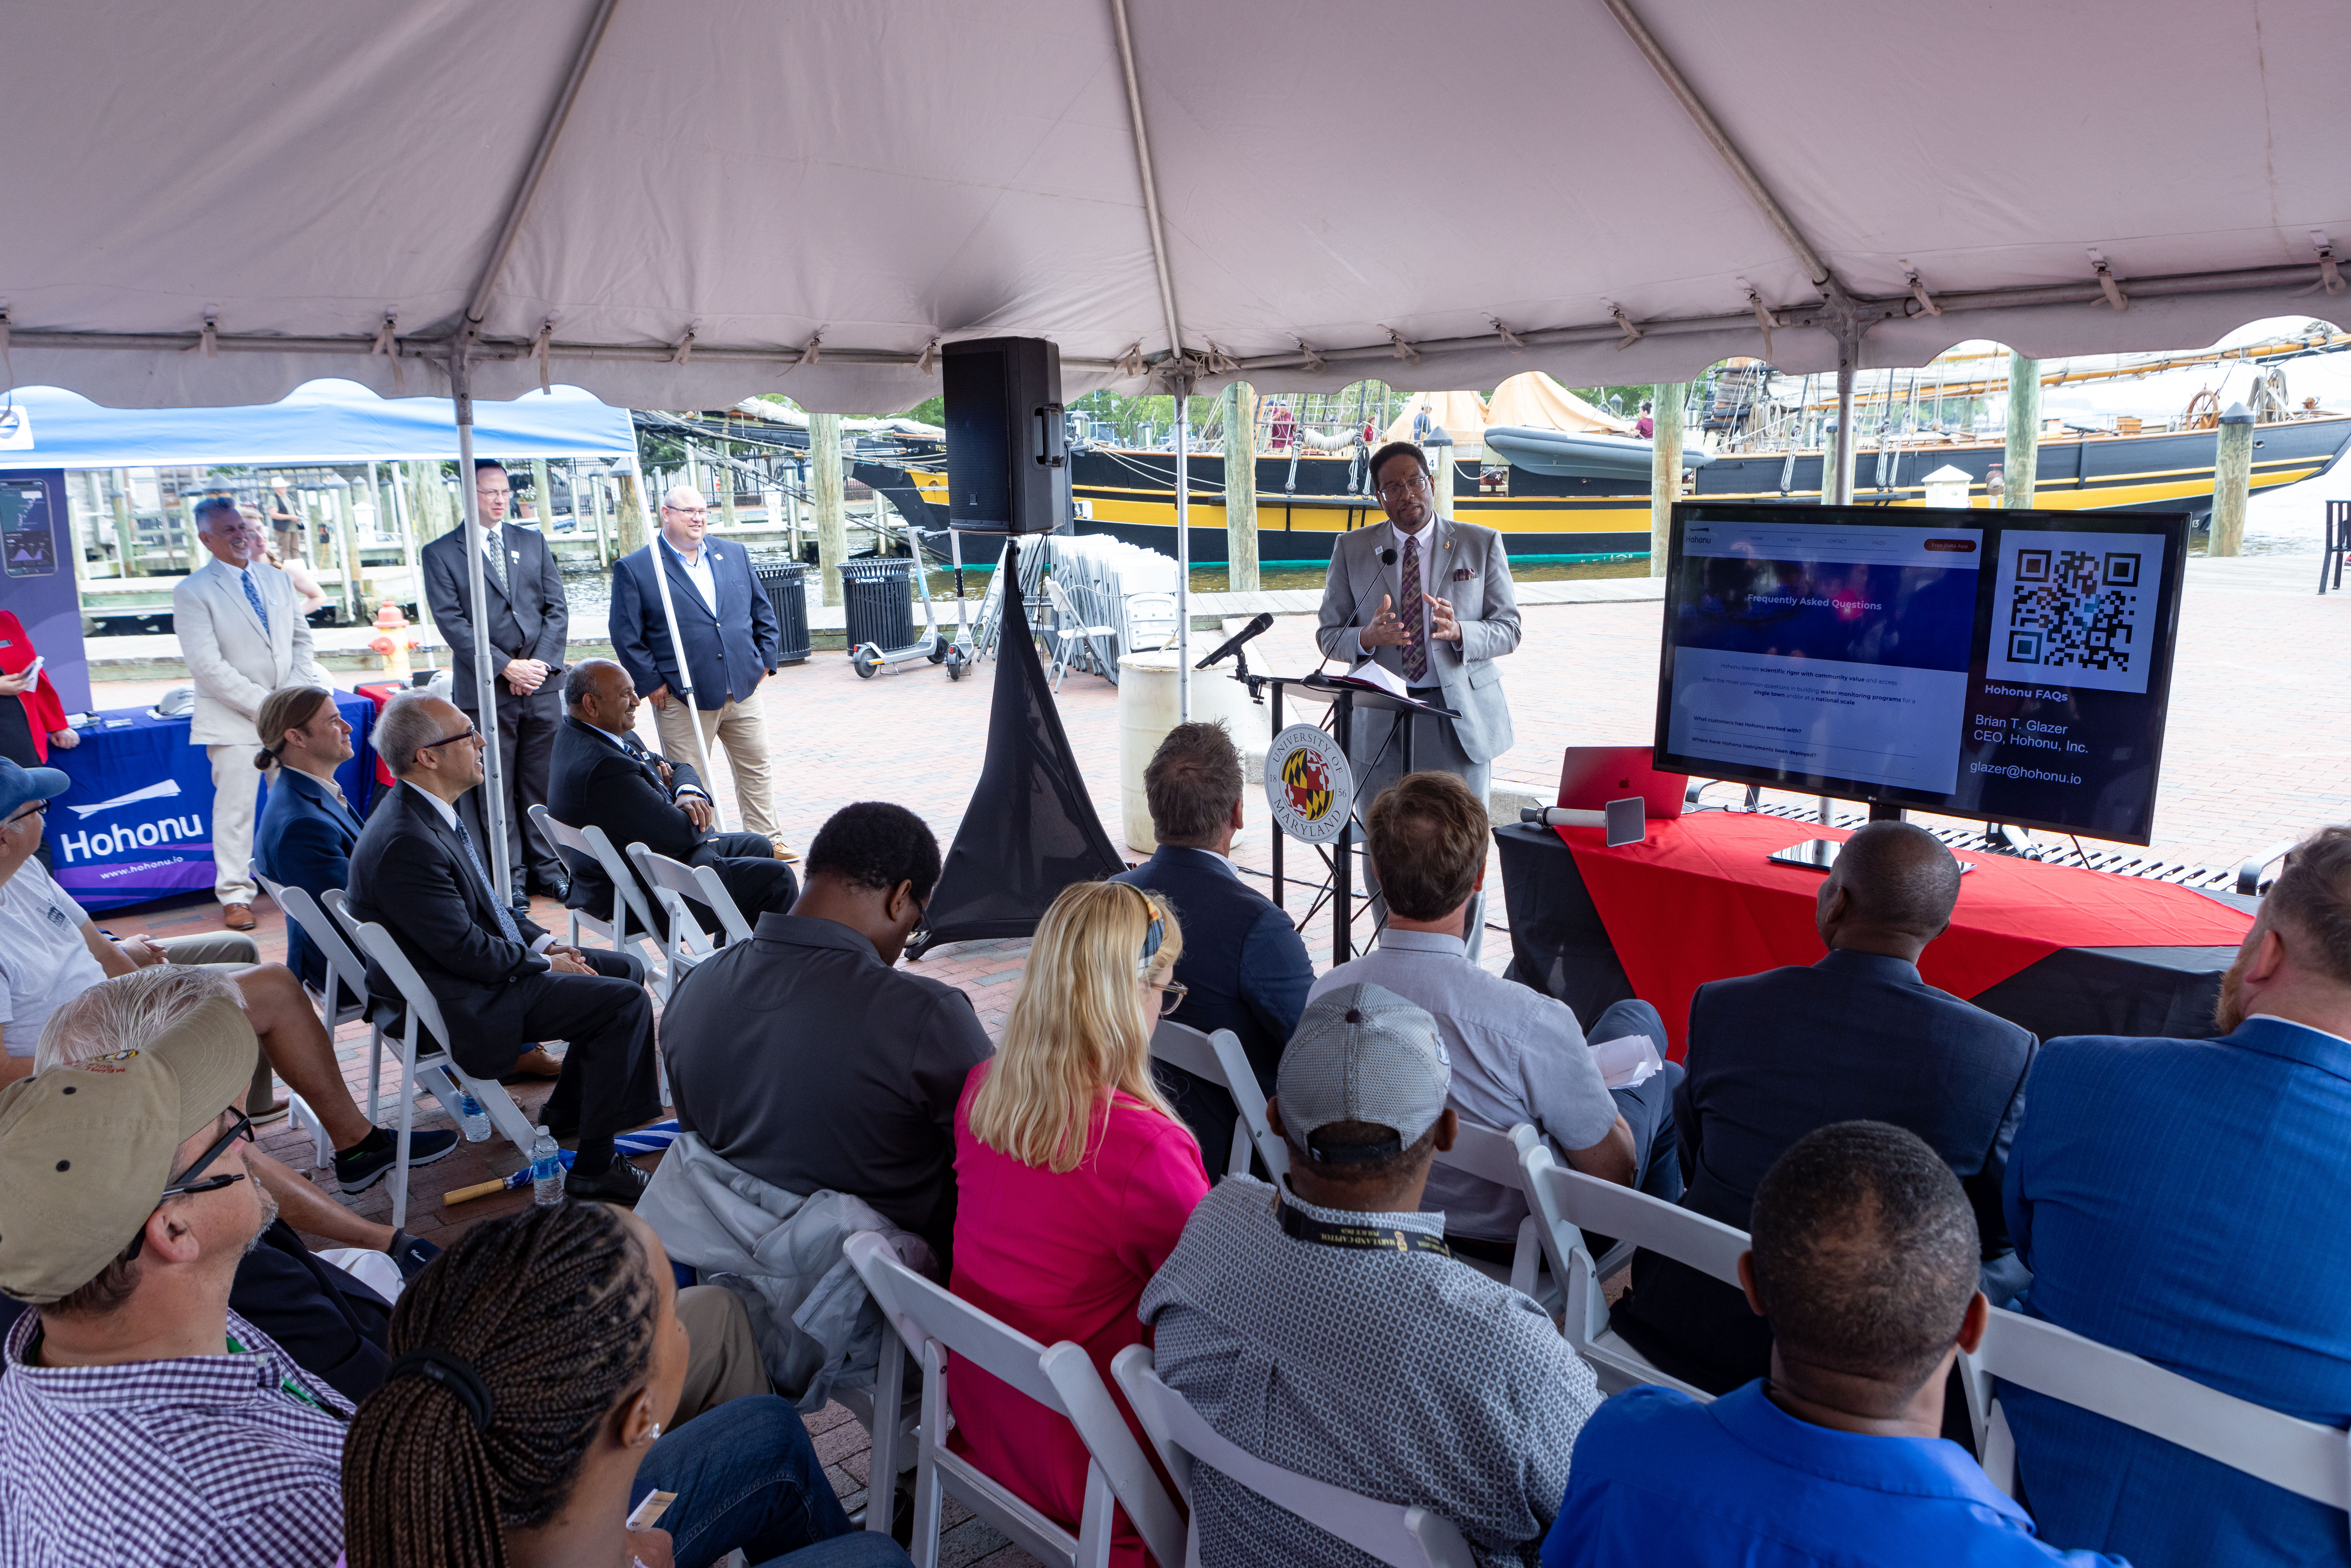 President Darryll Pines speaks at the HydroNet press conference on Wednesday, June 5.